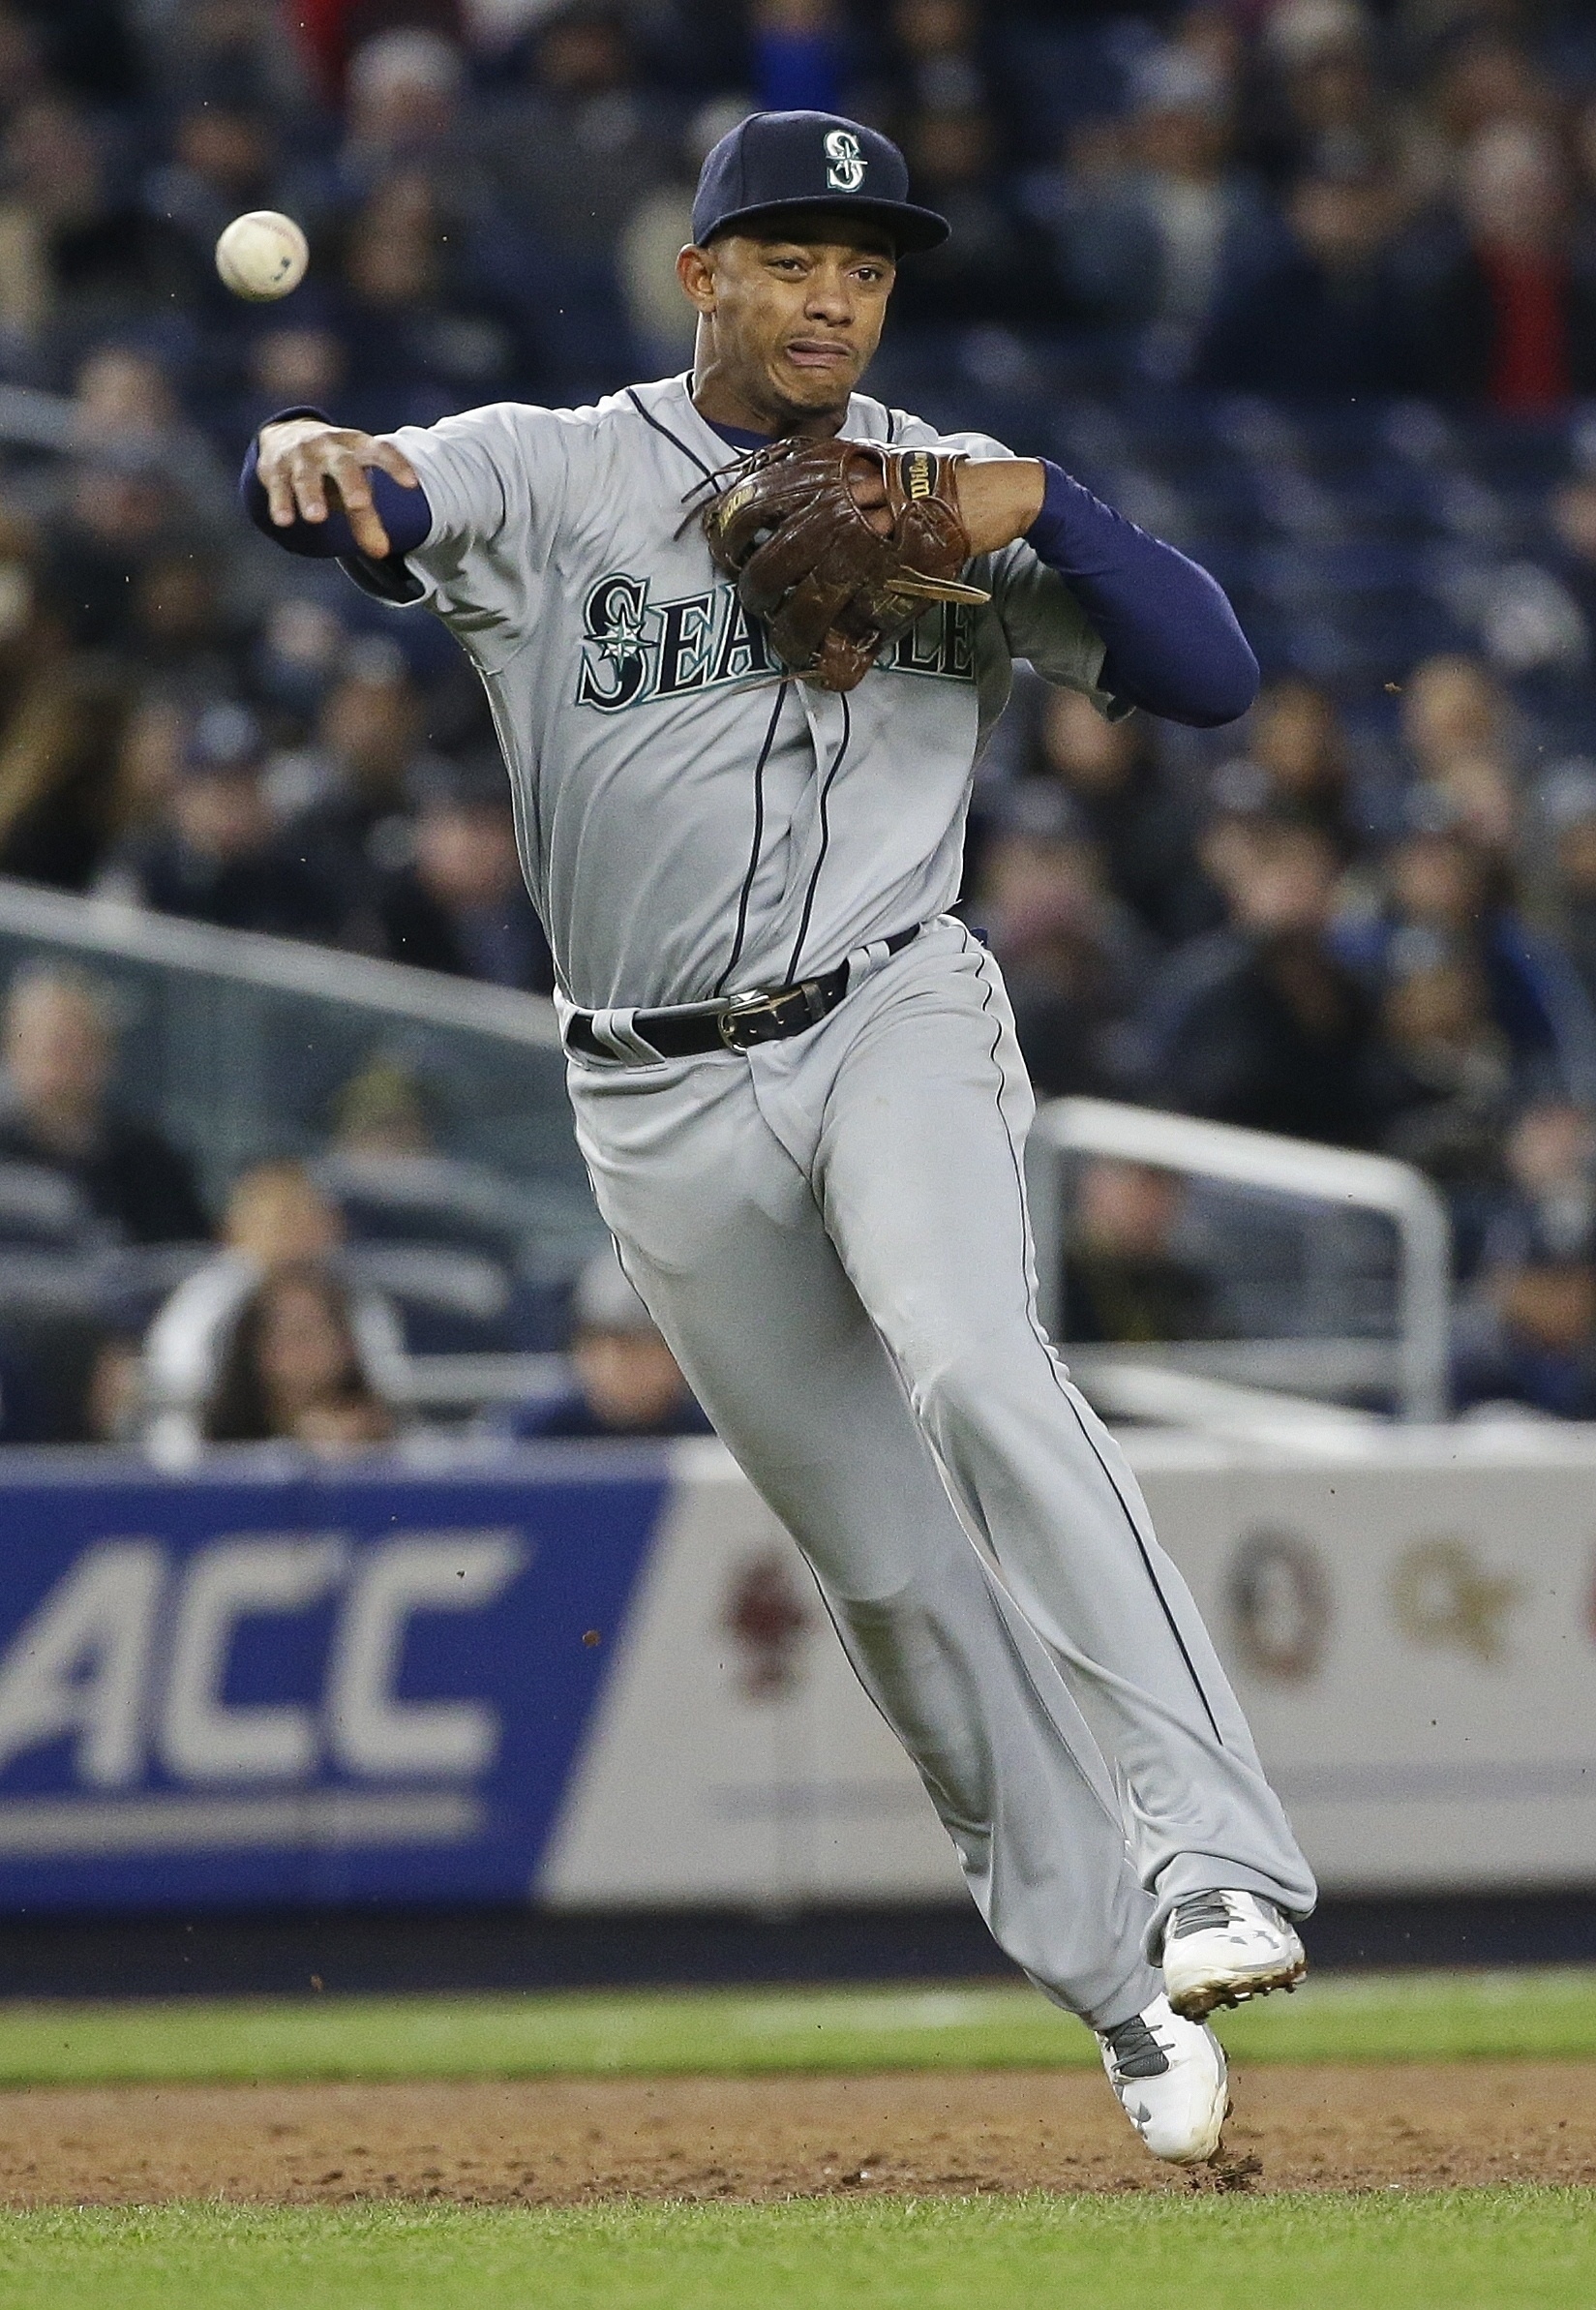 Mariners shortstop Ketel Marte injured his thumb in Saturday’s game while sliding into second base.